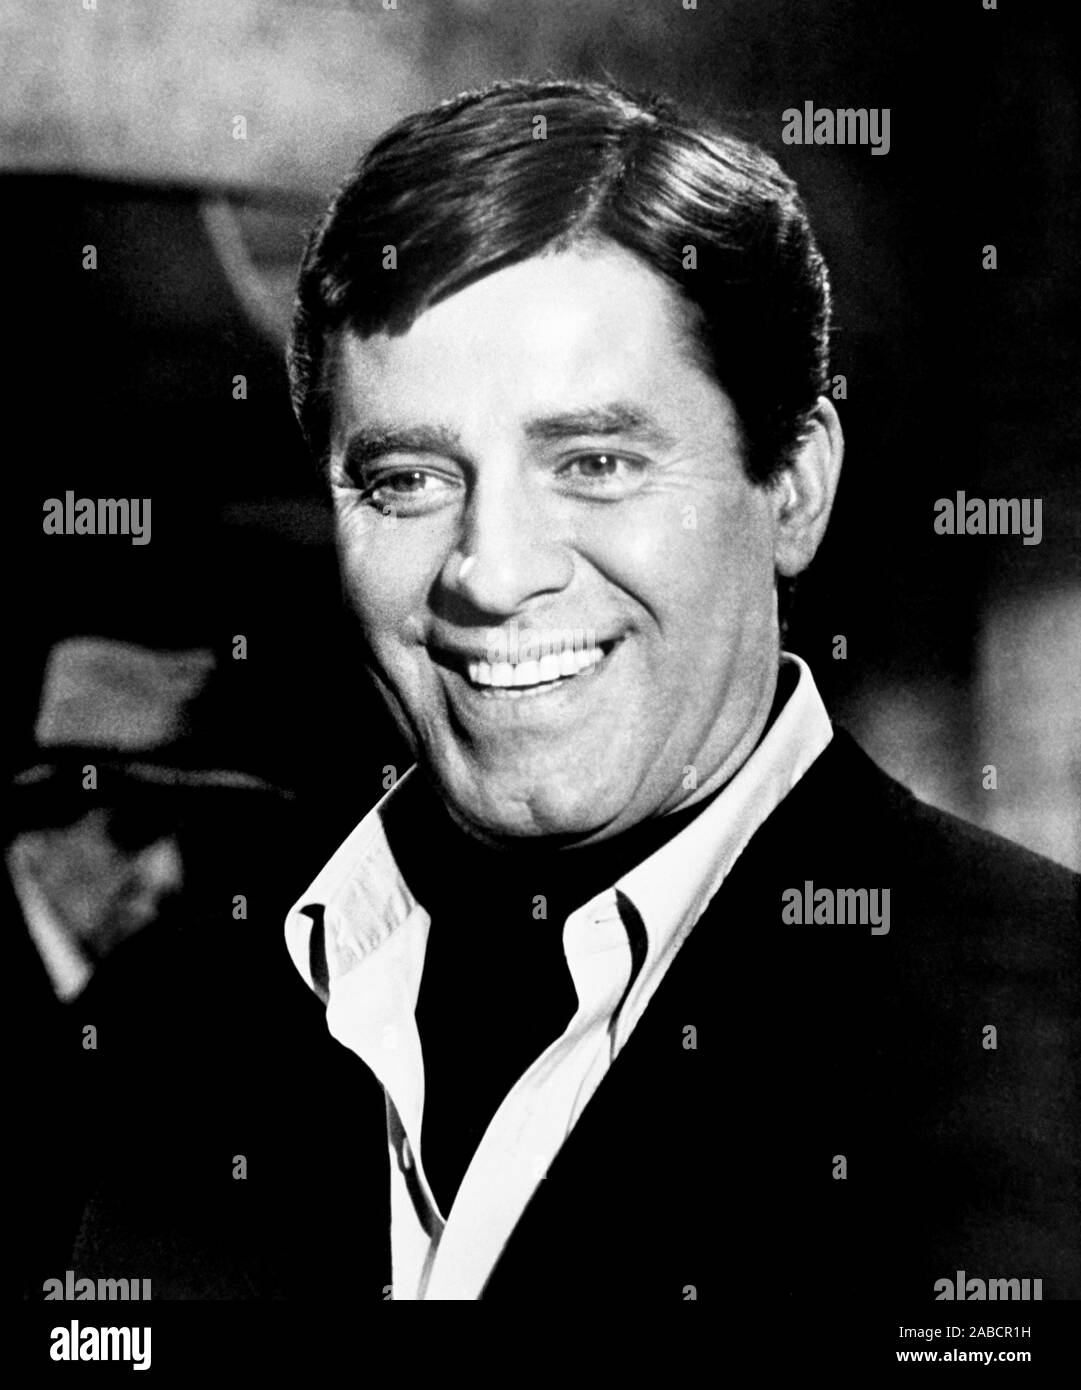 HOOK, LINE AND SINKER, Jerry Lewis, 1969 Stock Photo - Alamy